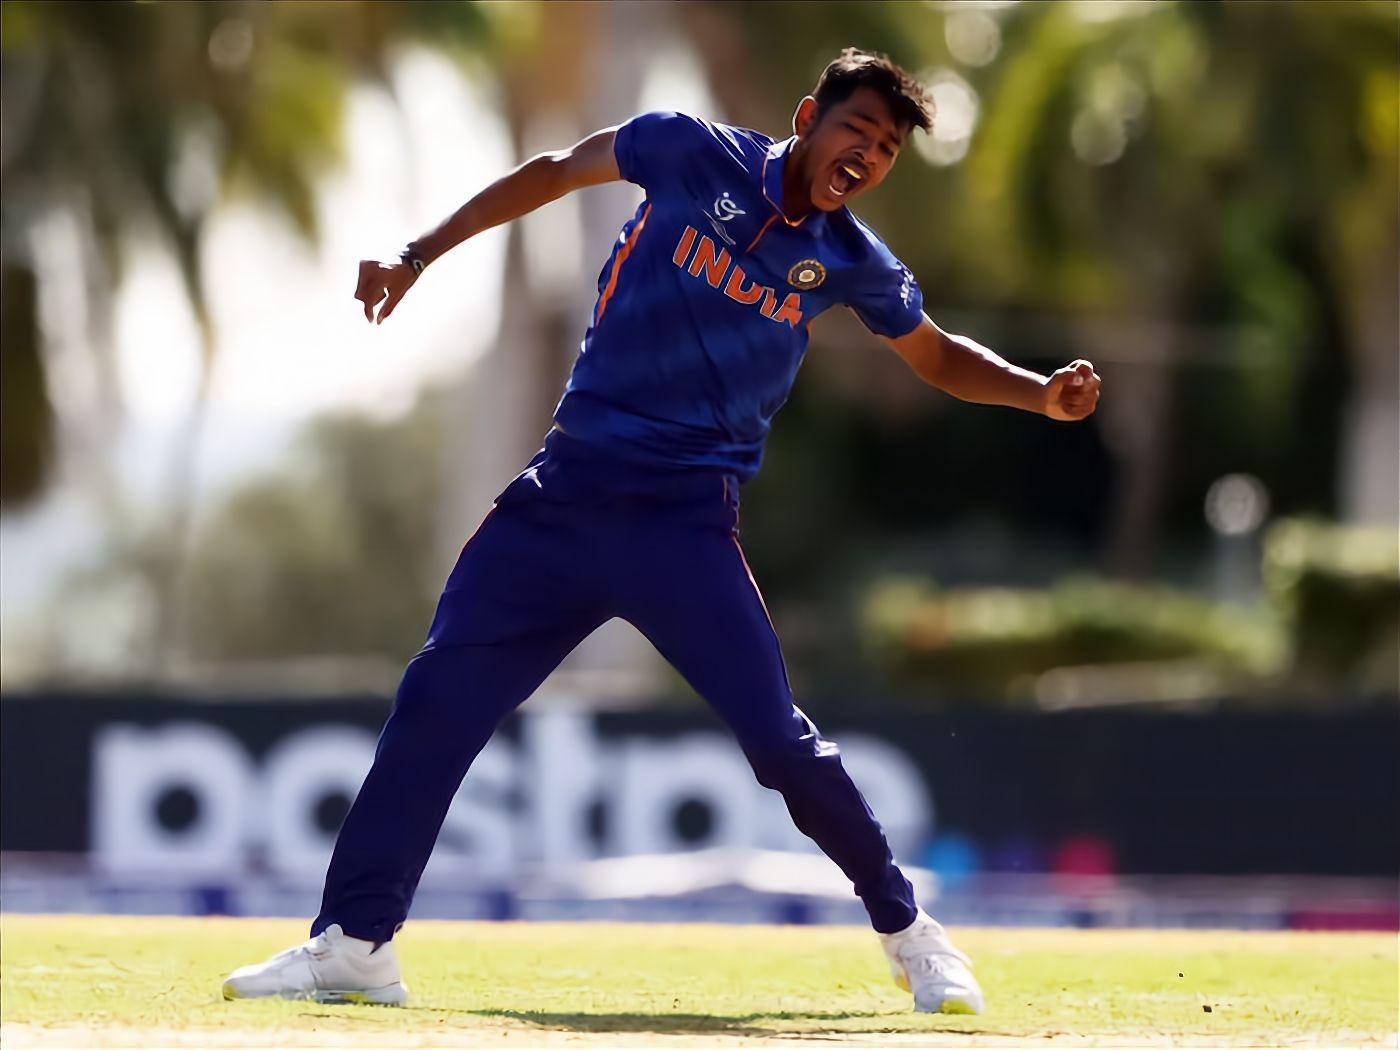 Ravi Kumar picked up 10 wickets at the U19 World Cup at a sensational strike-rate of 21.60 [Credits: Star Sports]